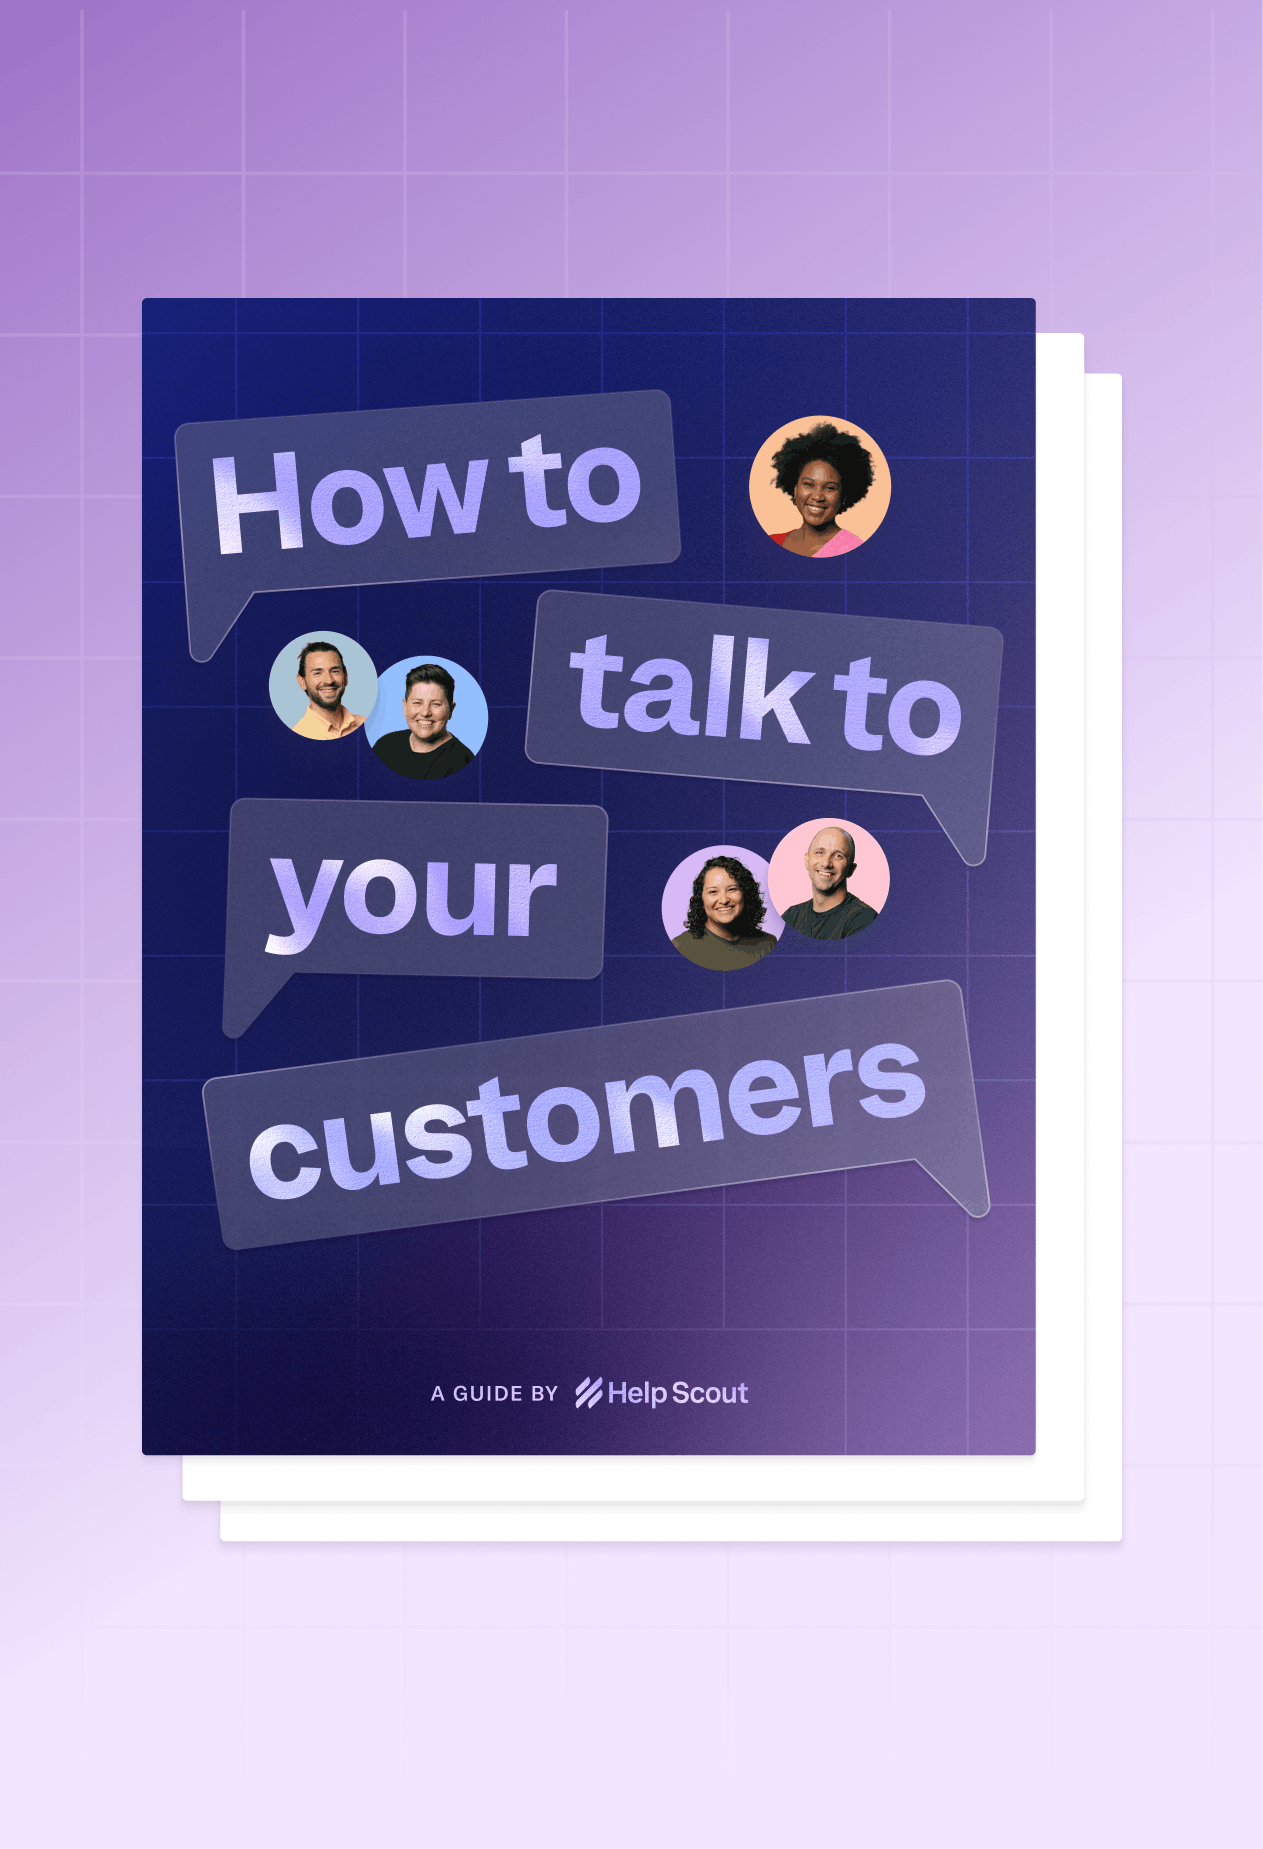 How to Talk to Your Customers-Hero Visual